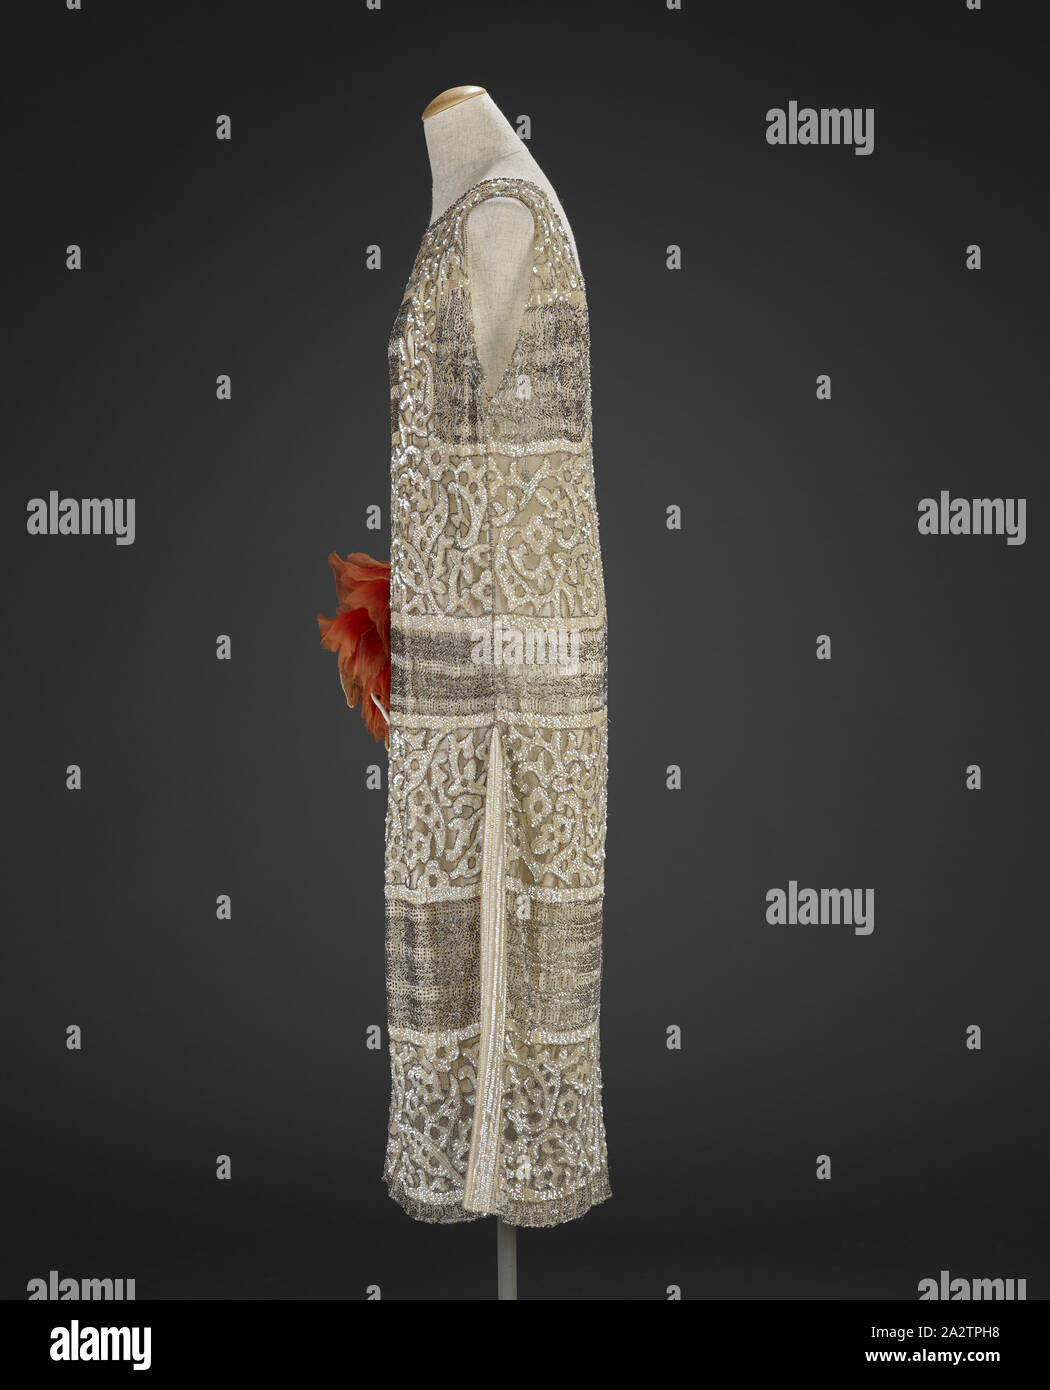 dress, Anna Griffin, Dressmaker (American, 1867-1951), 1920s, silk chiffon or netting, glass beads, sequins, center back 34 in., center front 41 in., bust 38 in., waist 38 in., shoulders 12 in., Textile and Fashion Arts Stock Photo